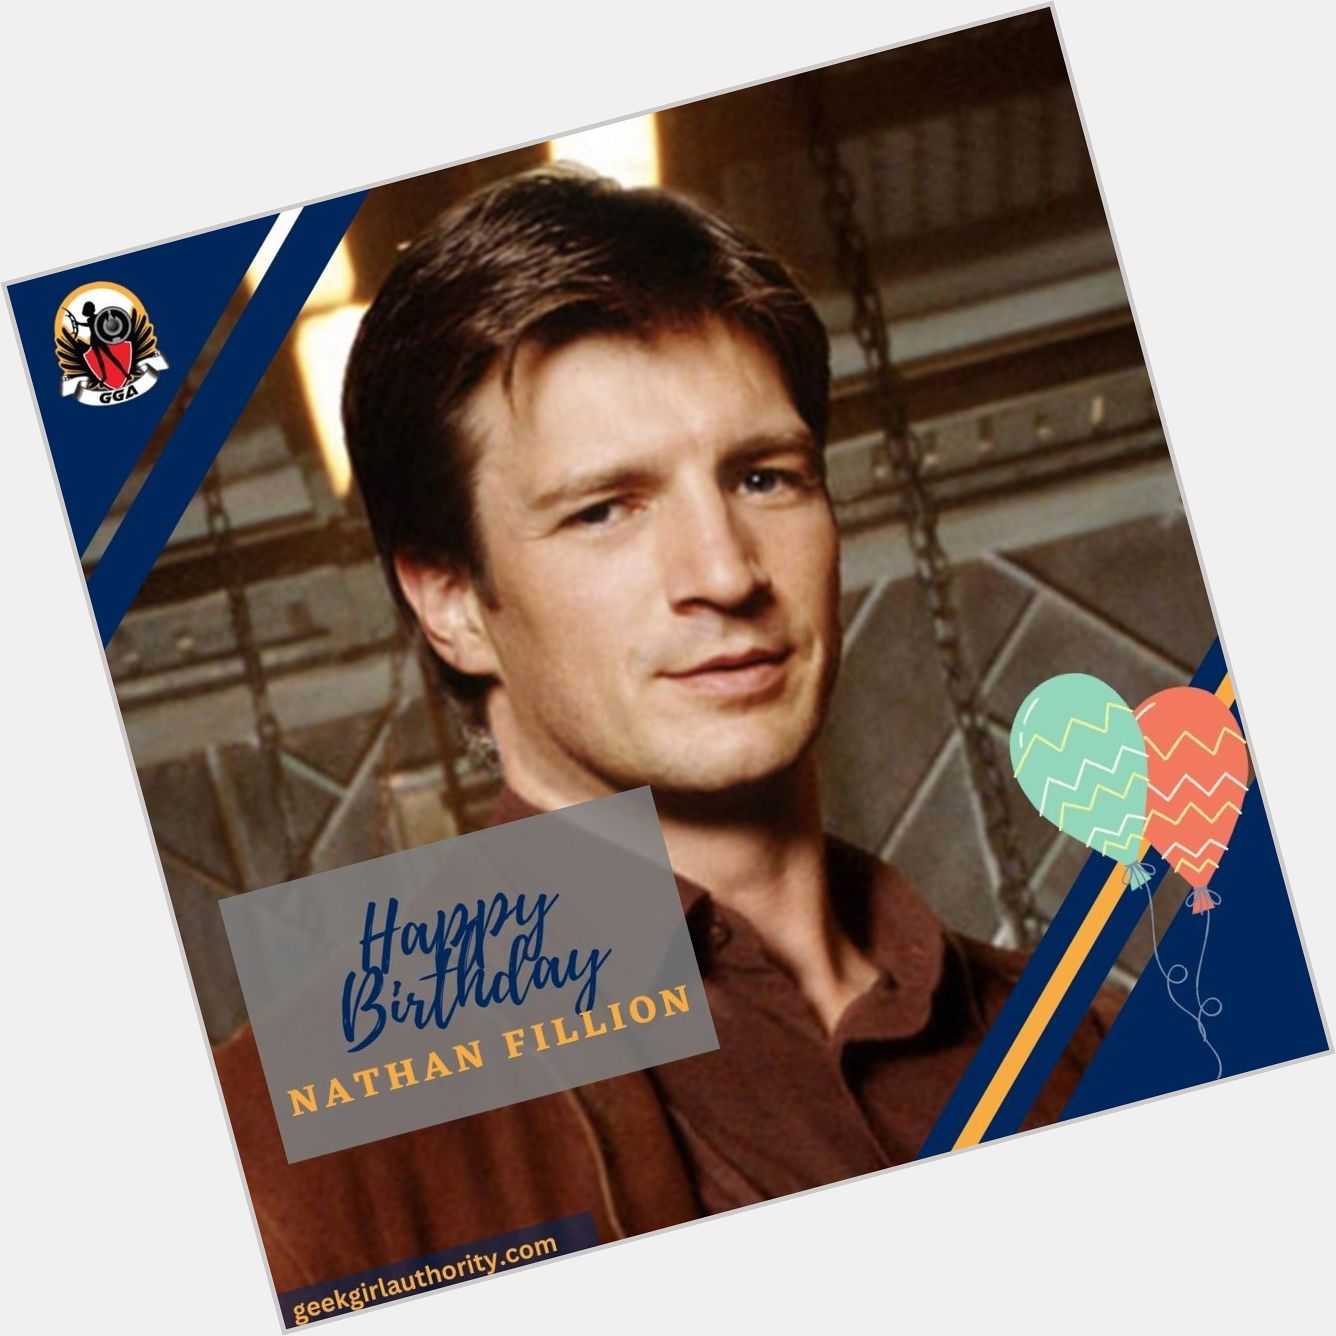 Happy Birthday, Nathan Fillion! Which one of his roles is your favorite and why is it Malcolm Reynolds? 